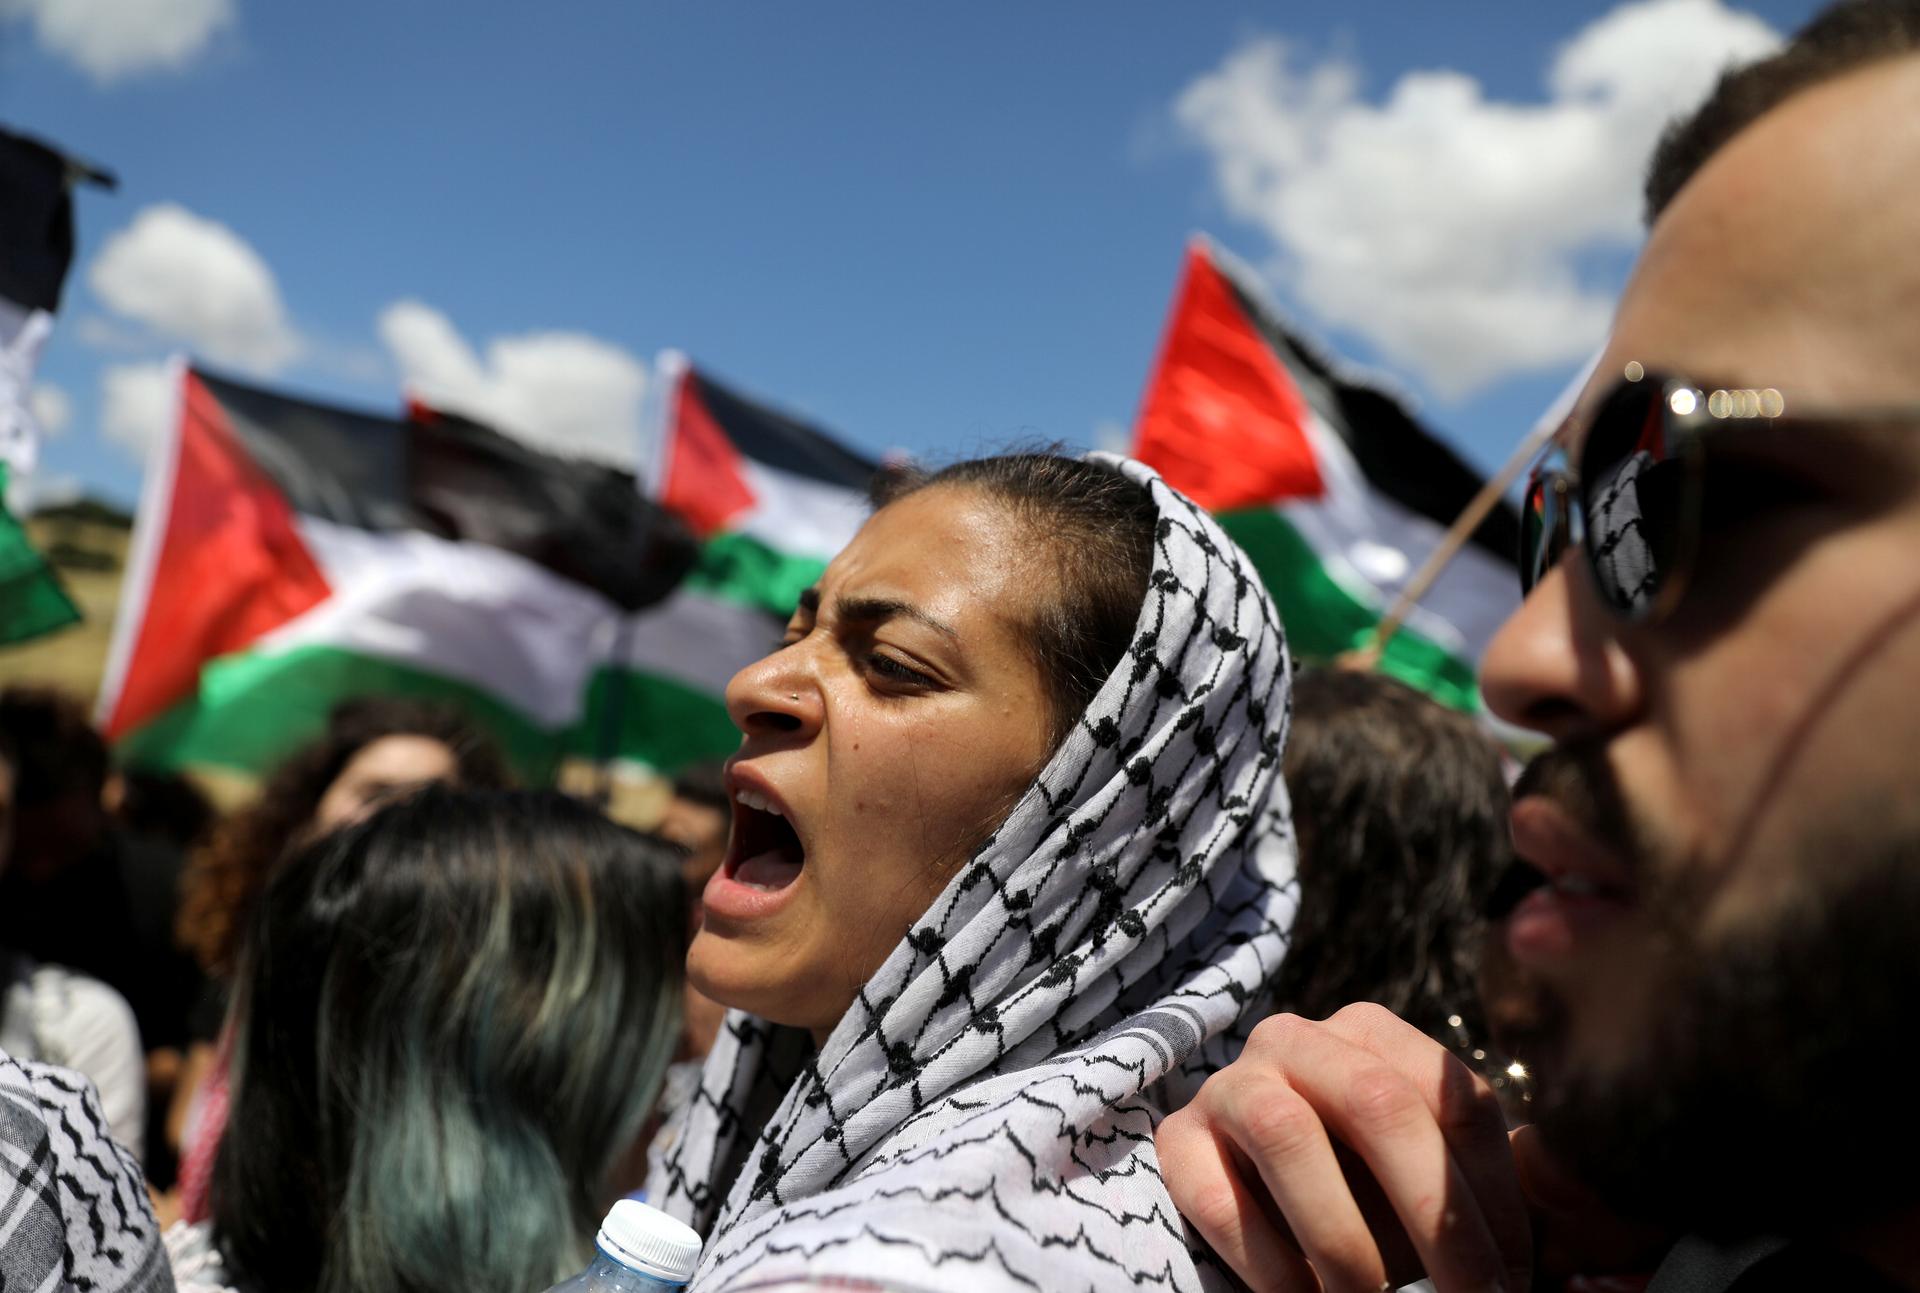 A woman shouts next to protesters holding Palestinian flag.